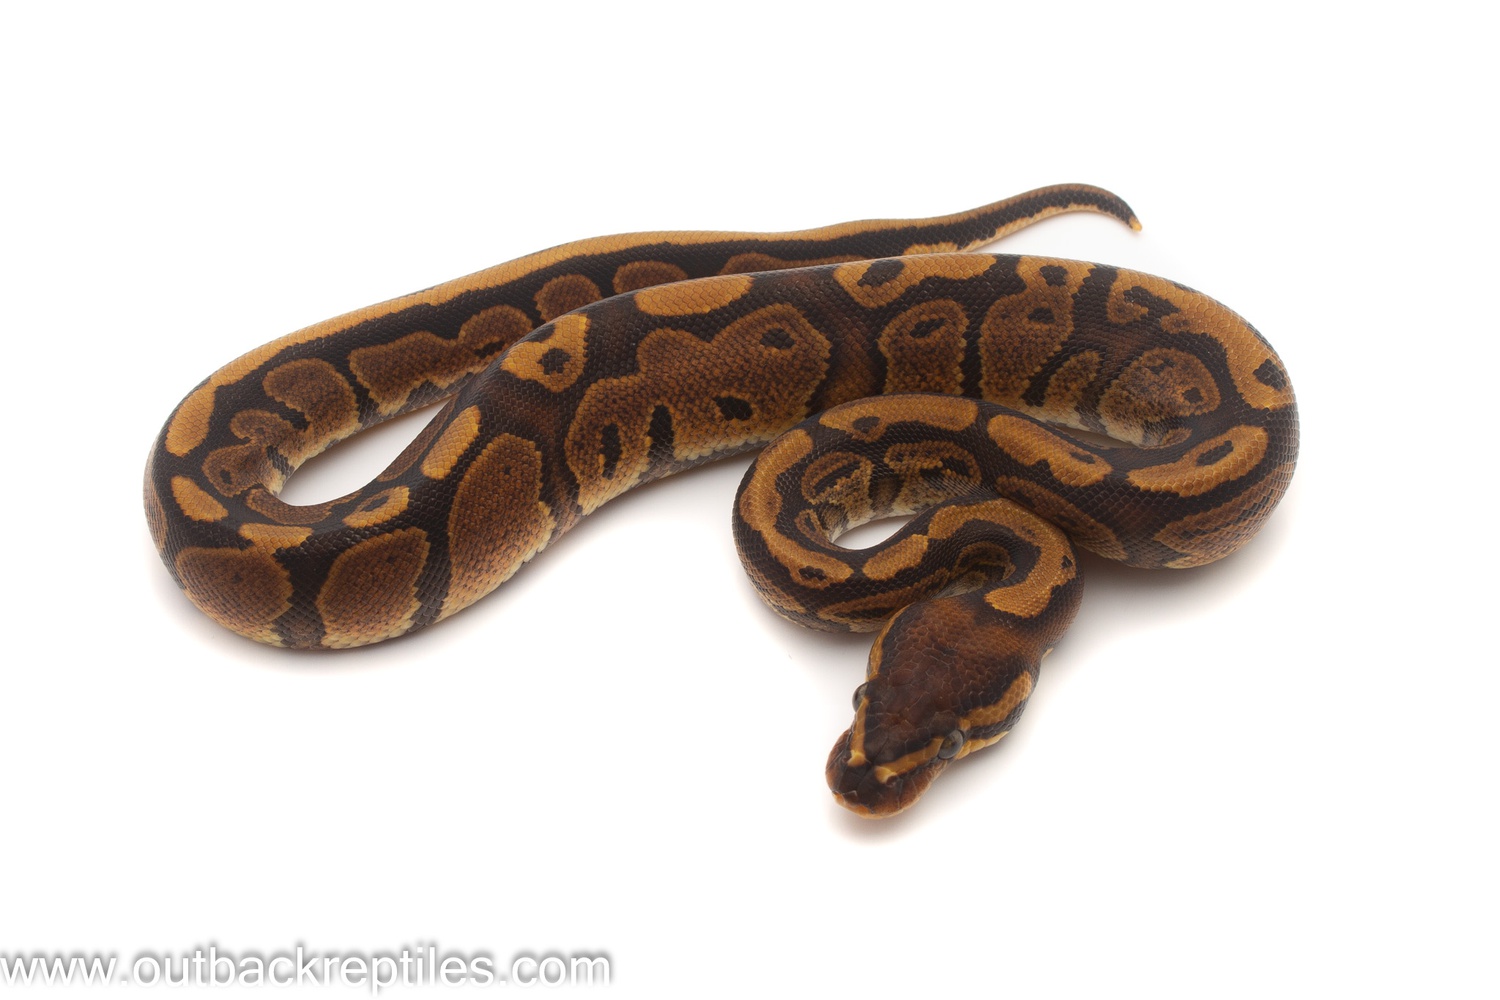 Red Stripe Ball Python by Outback Reptiles